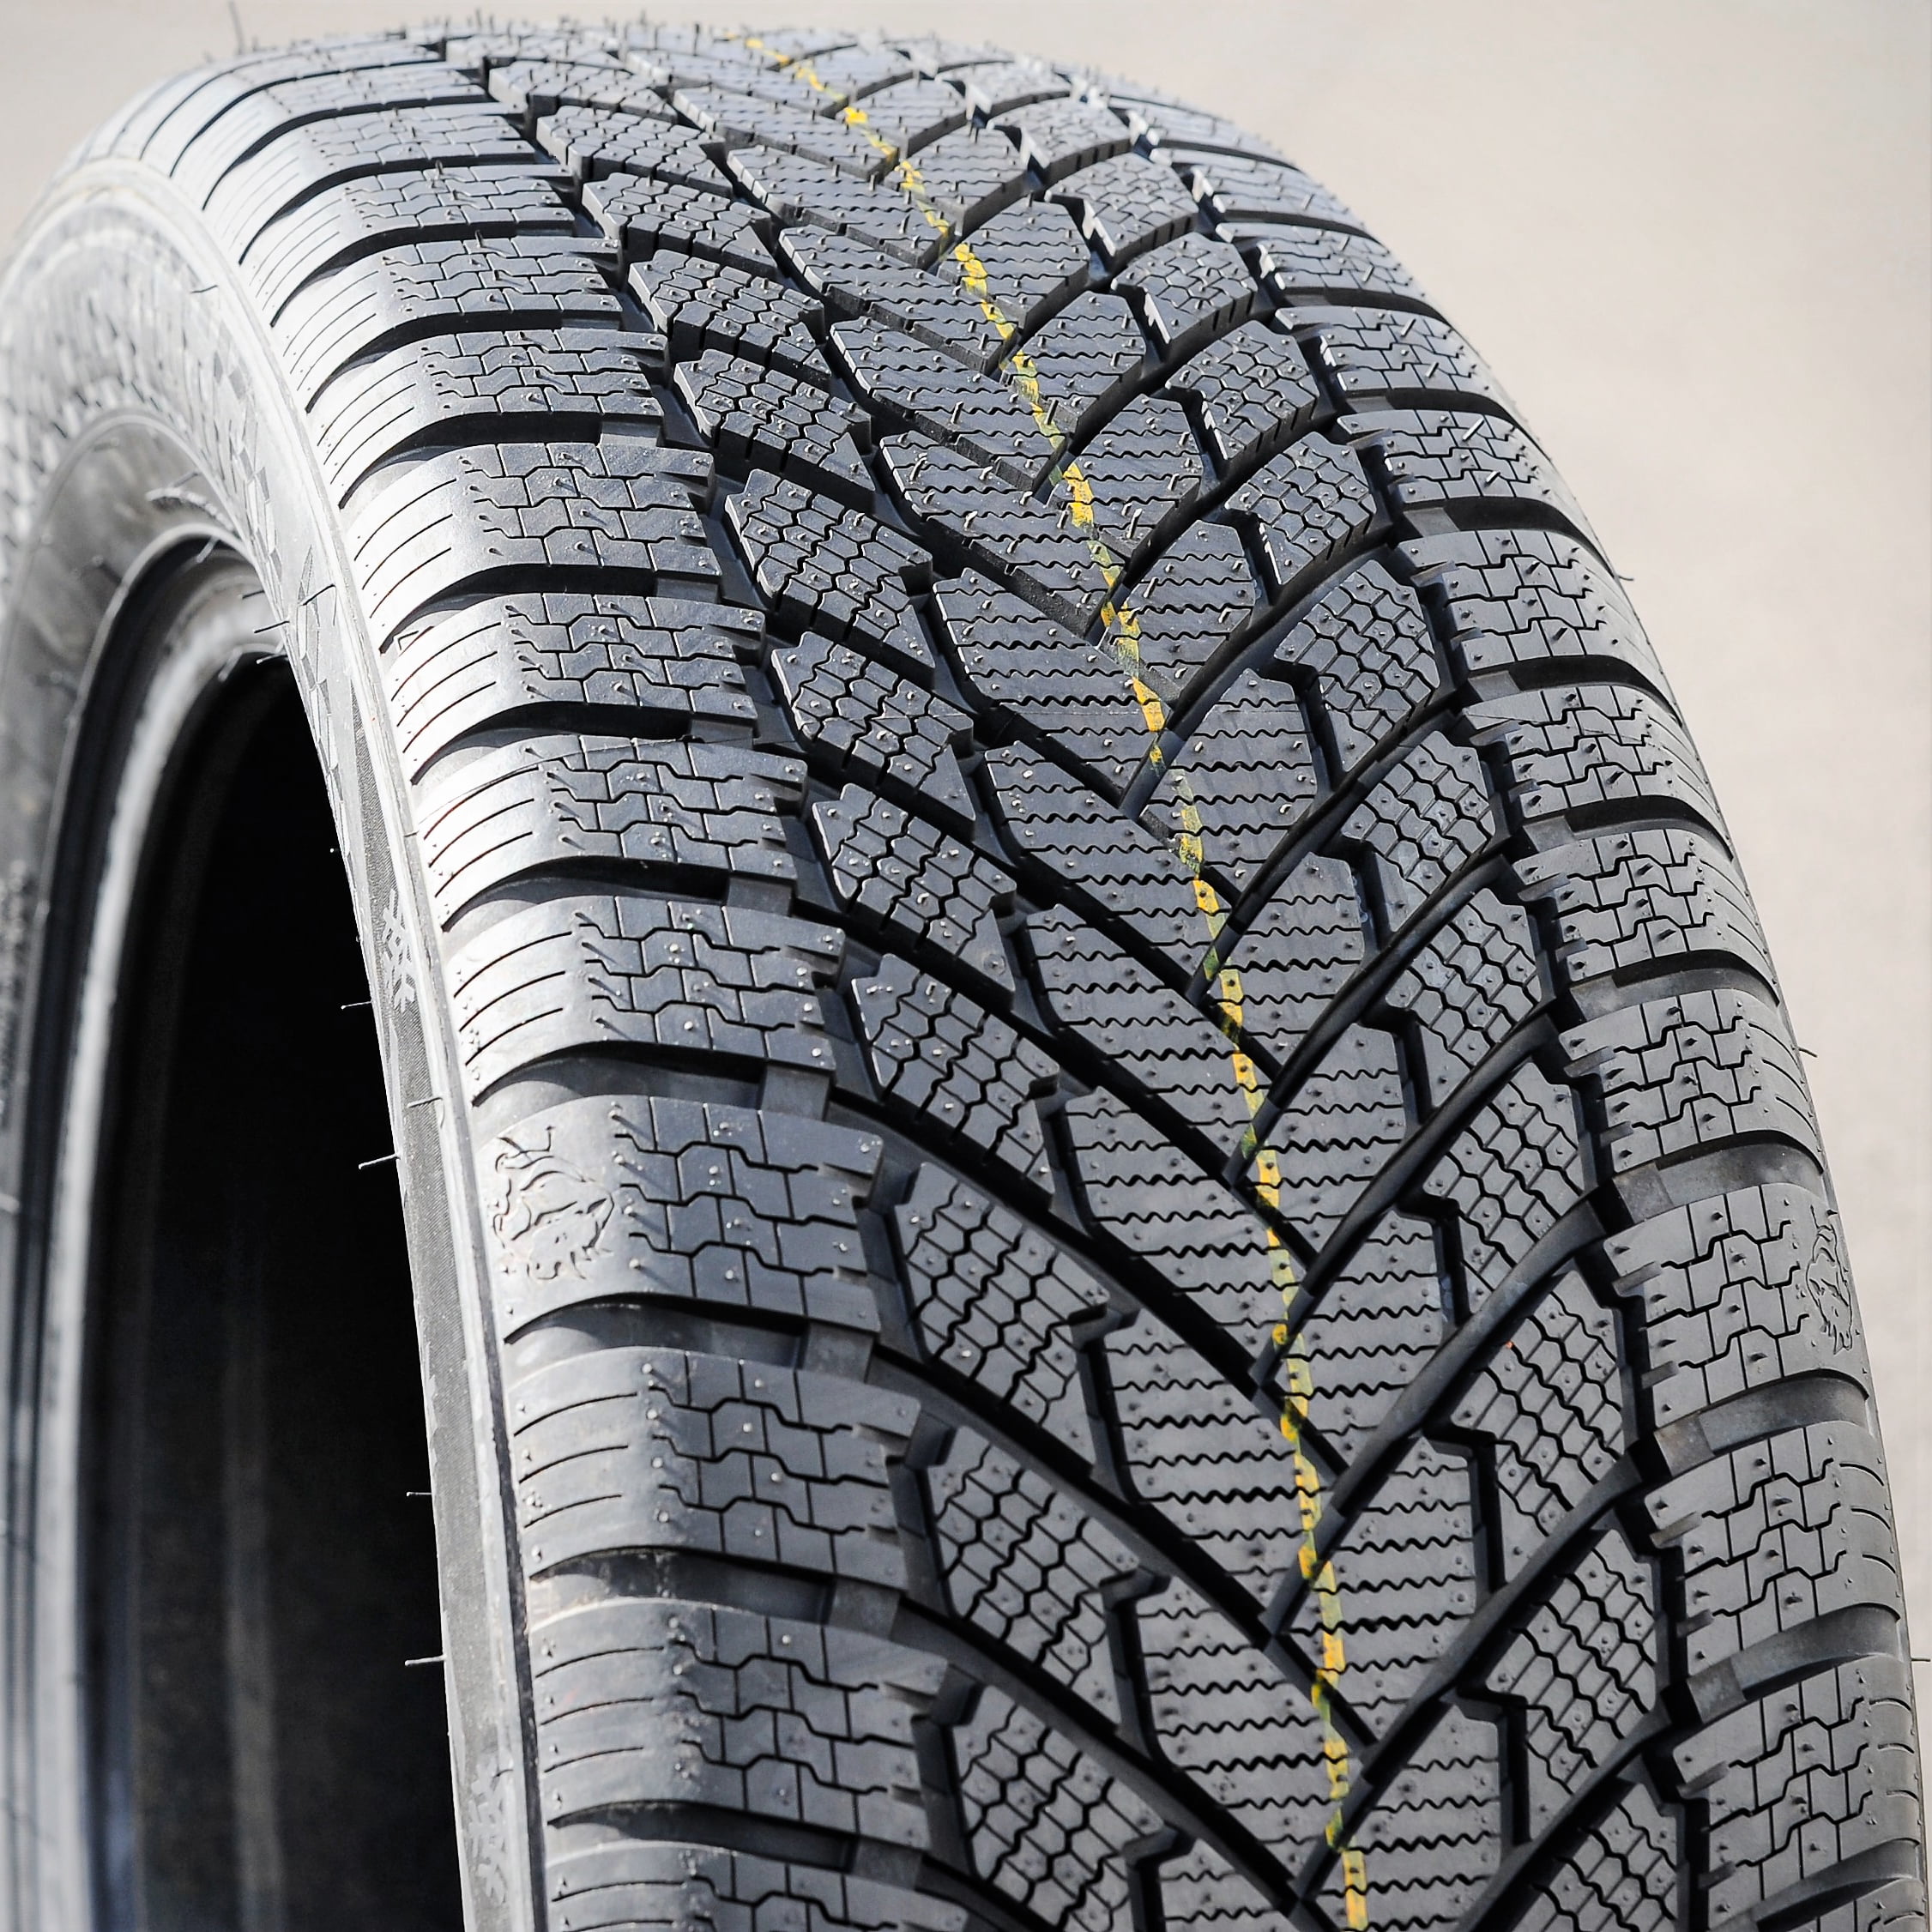 Continental ContiWinterContact (Studless) TS810S 84T 175/65R15 Snow Tire